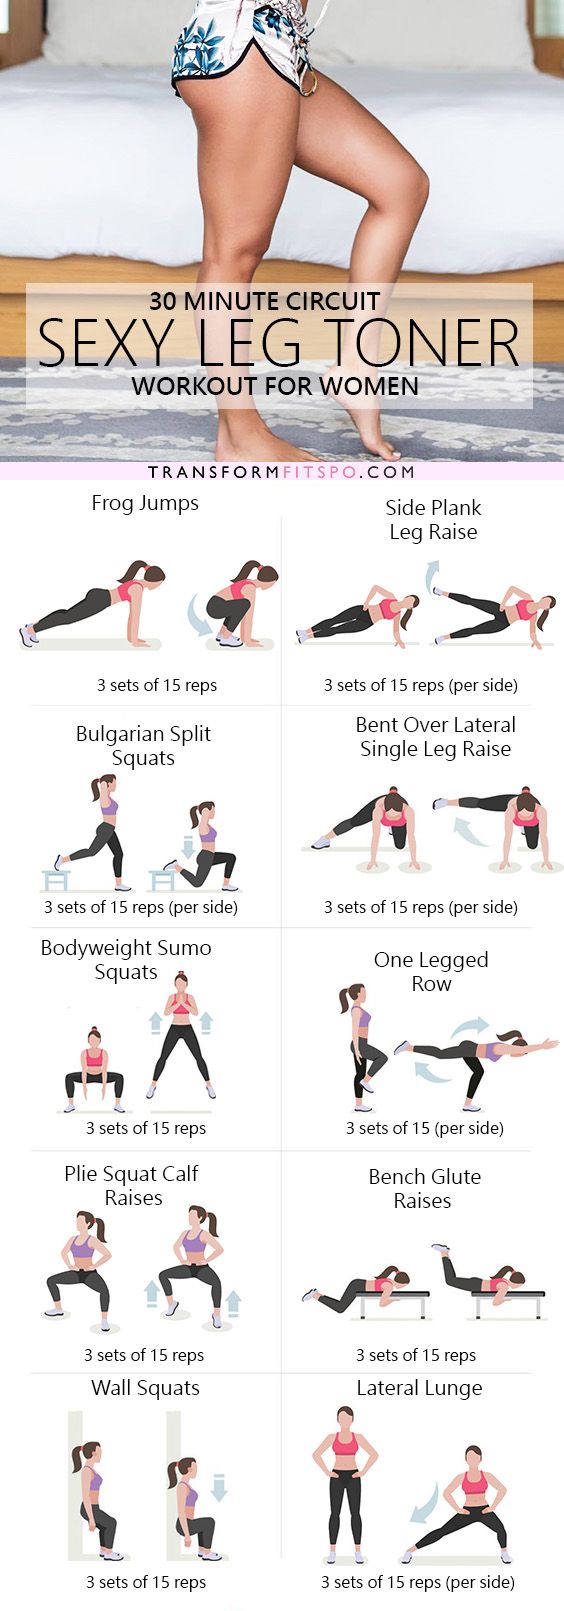 hourglass workout routine